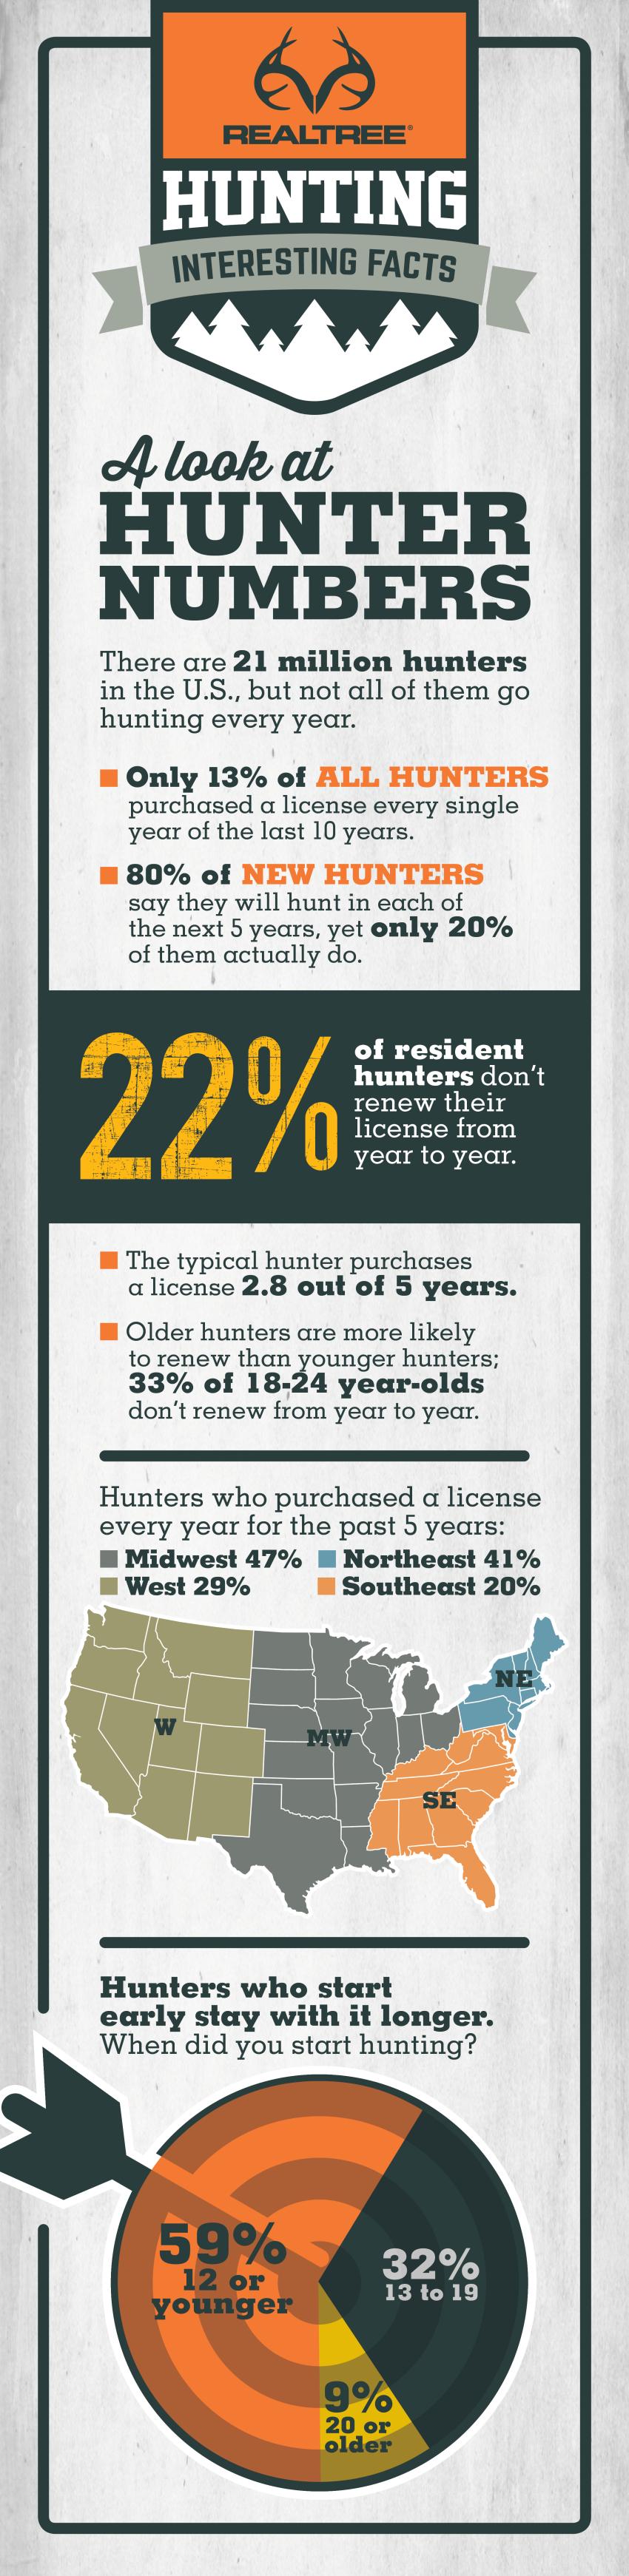 Hunting Number Infographic 2016 | Realtree B2B